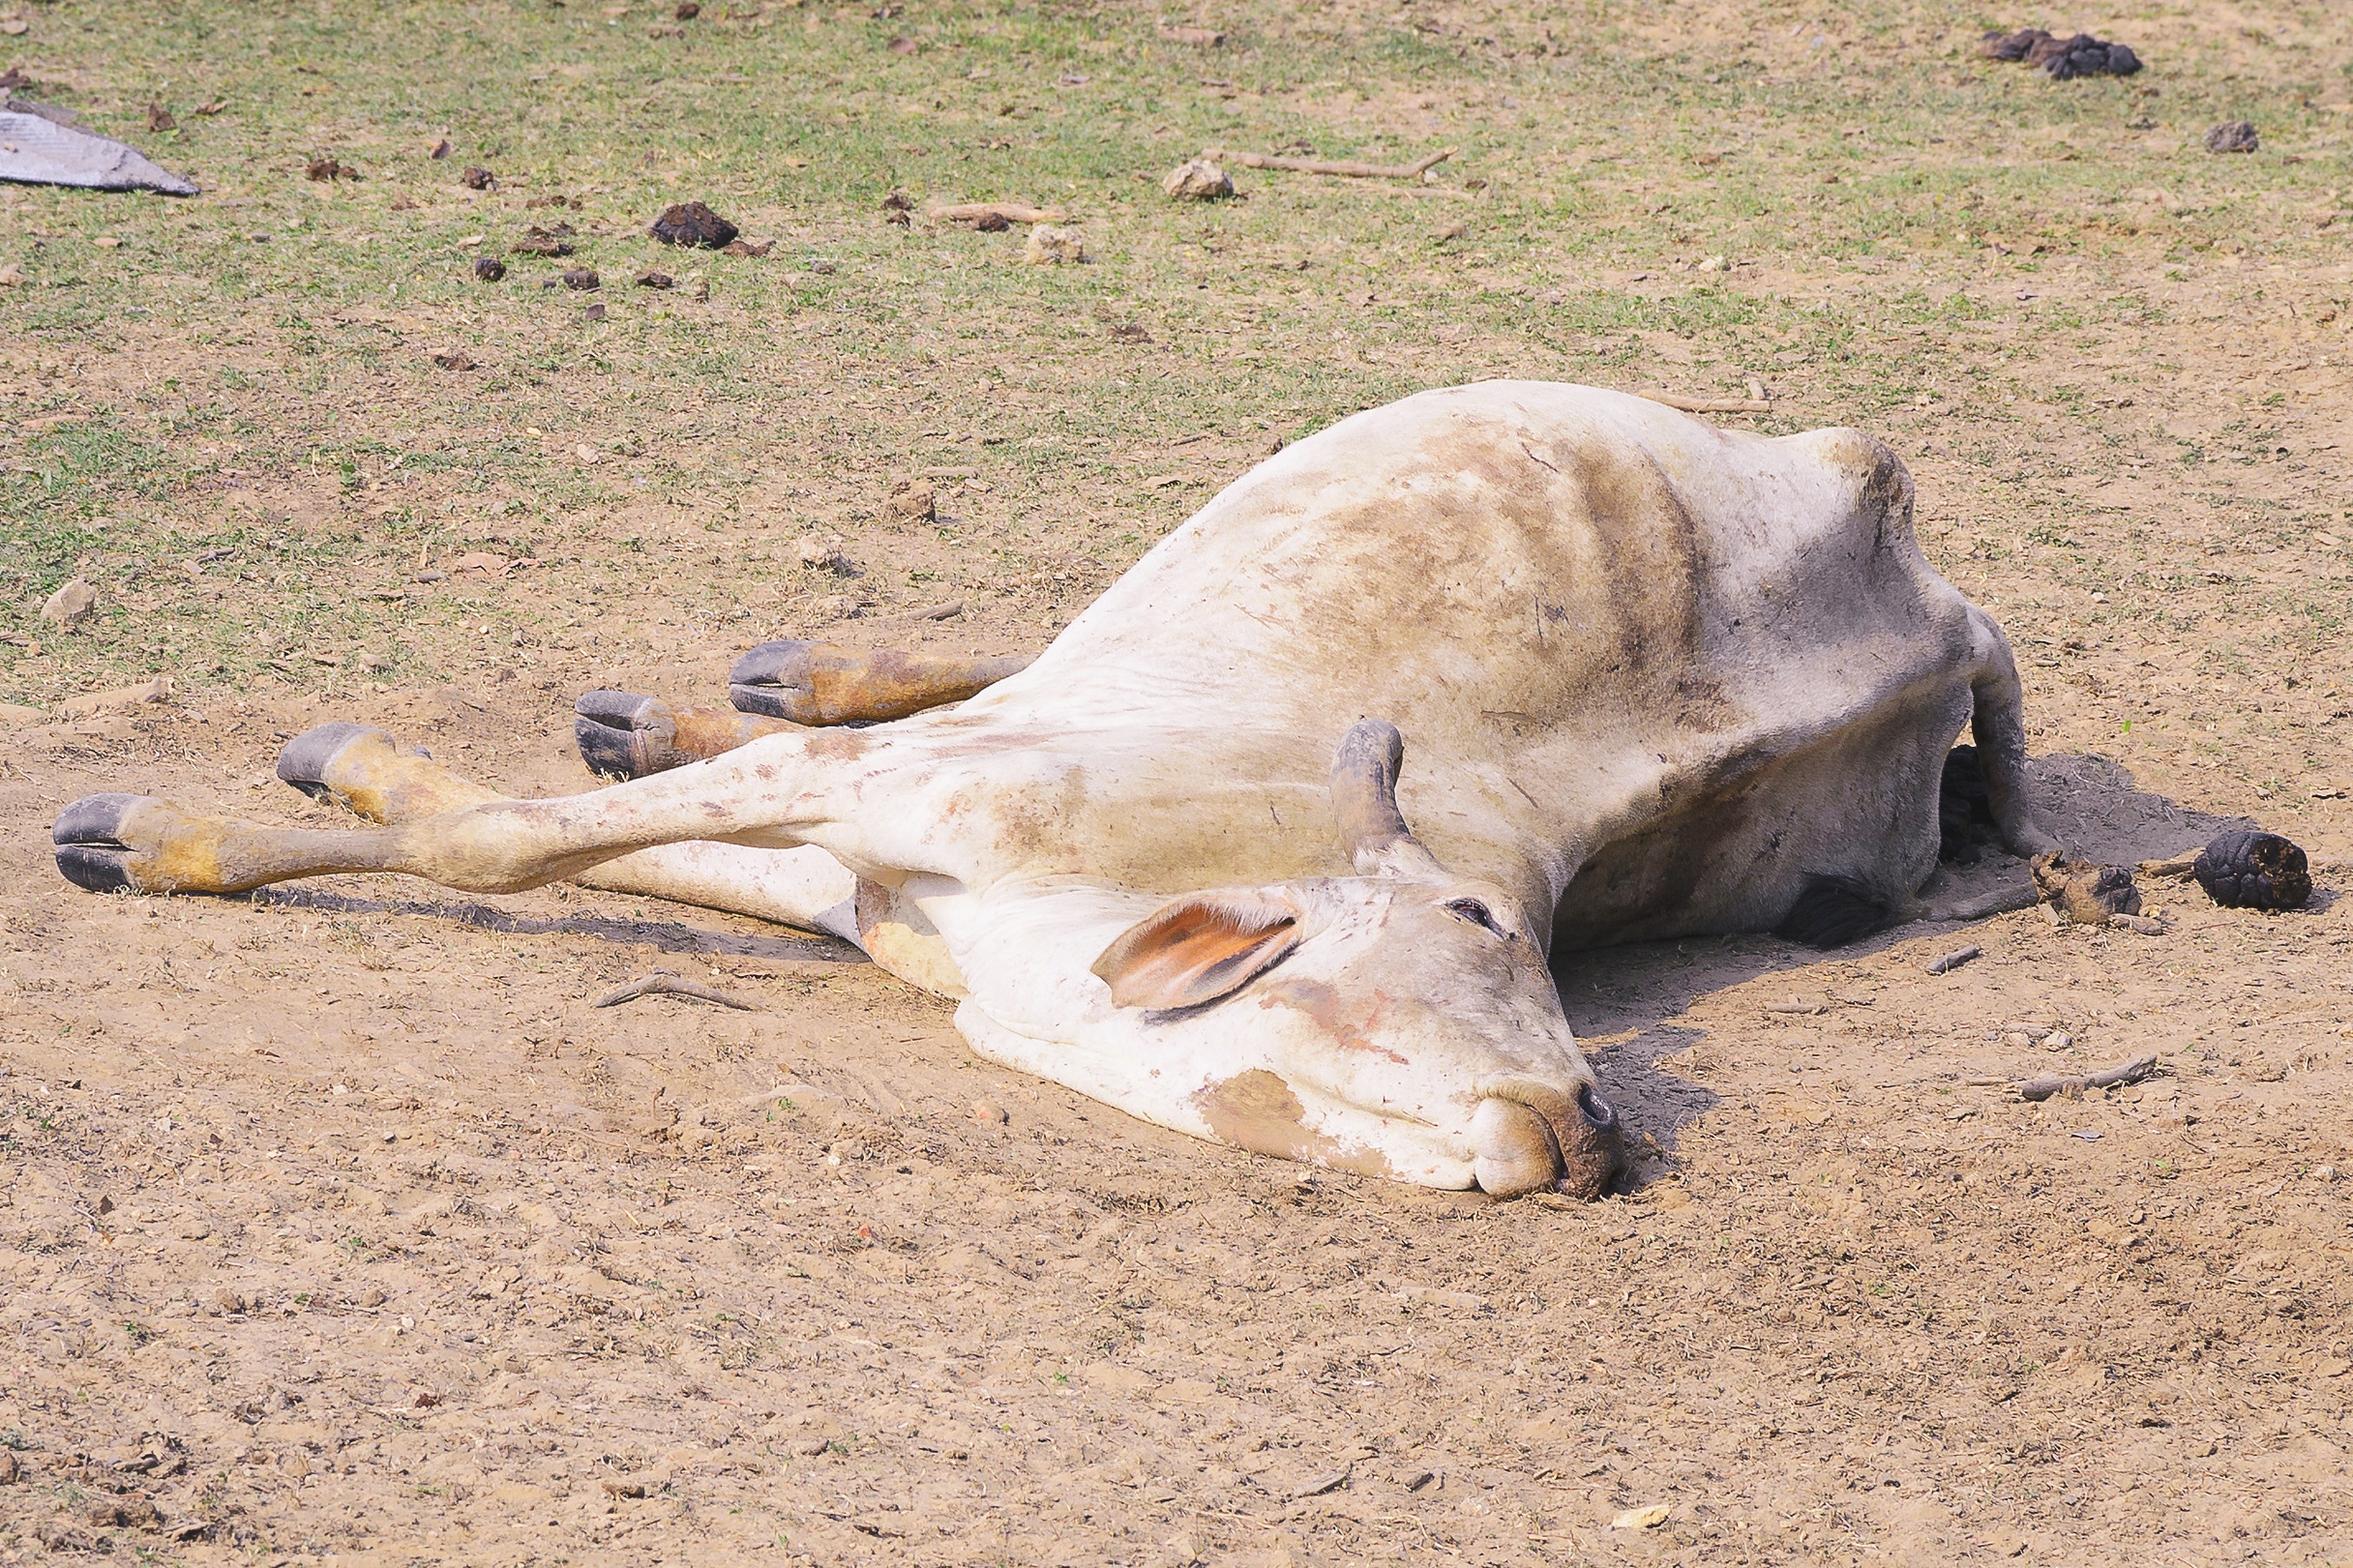 Over 200 cows found dead from suspected poisoning at ranch